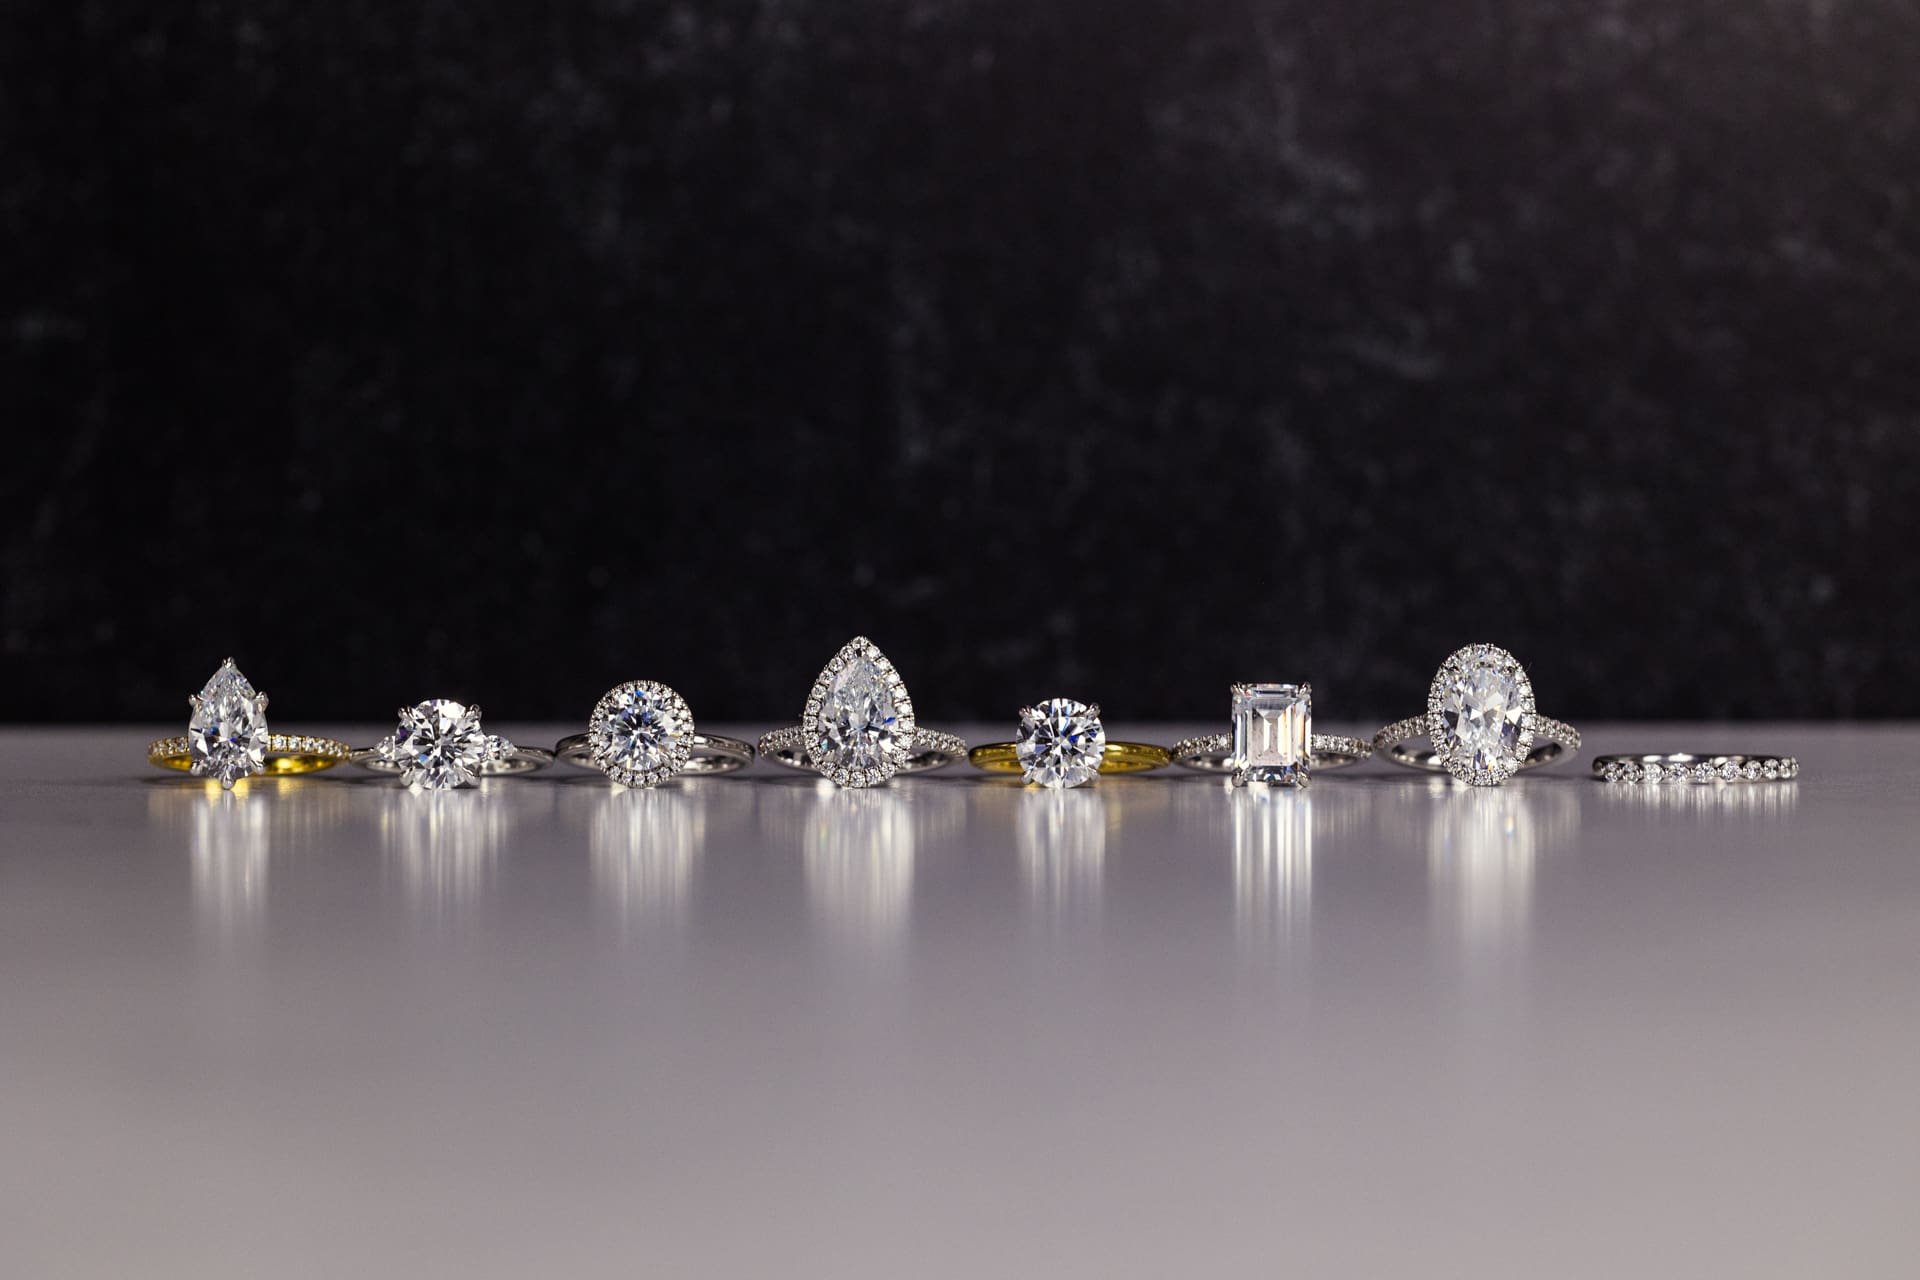 Dramatic jewelry product photography for Plum Diamonds featuring a variety of diamond ring designs on white marble counter with black background at Chicago photography studio P&M Studio